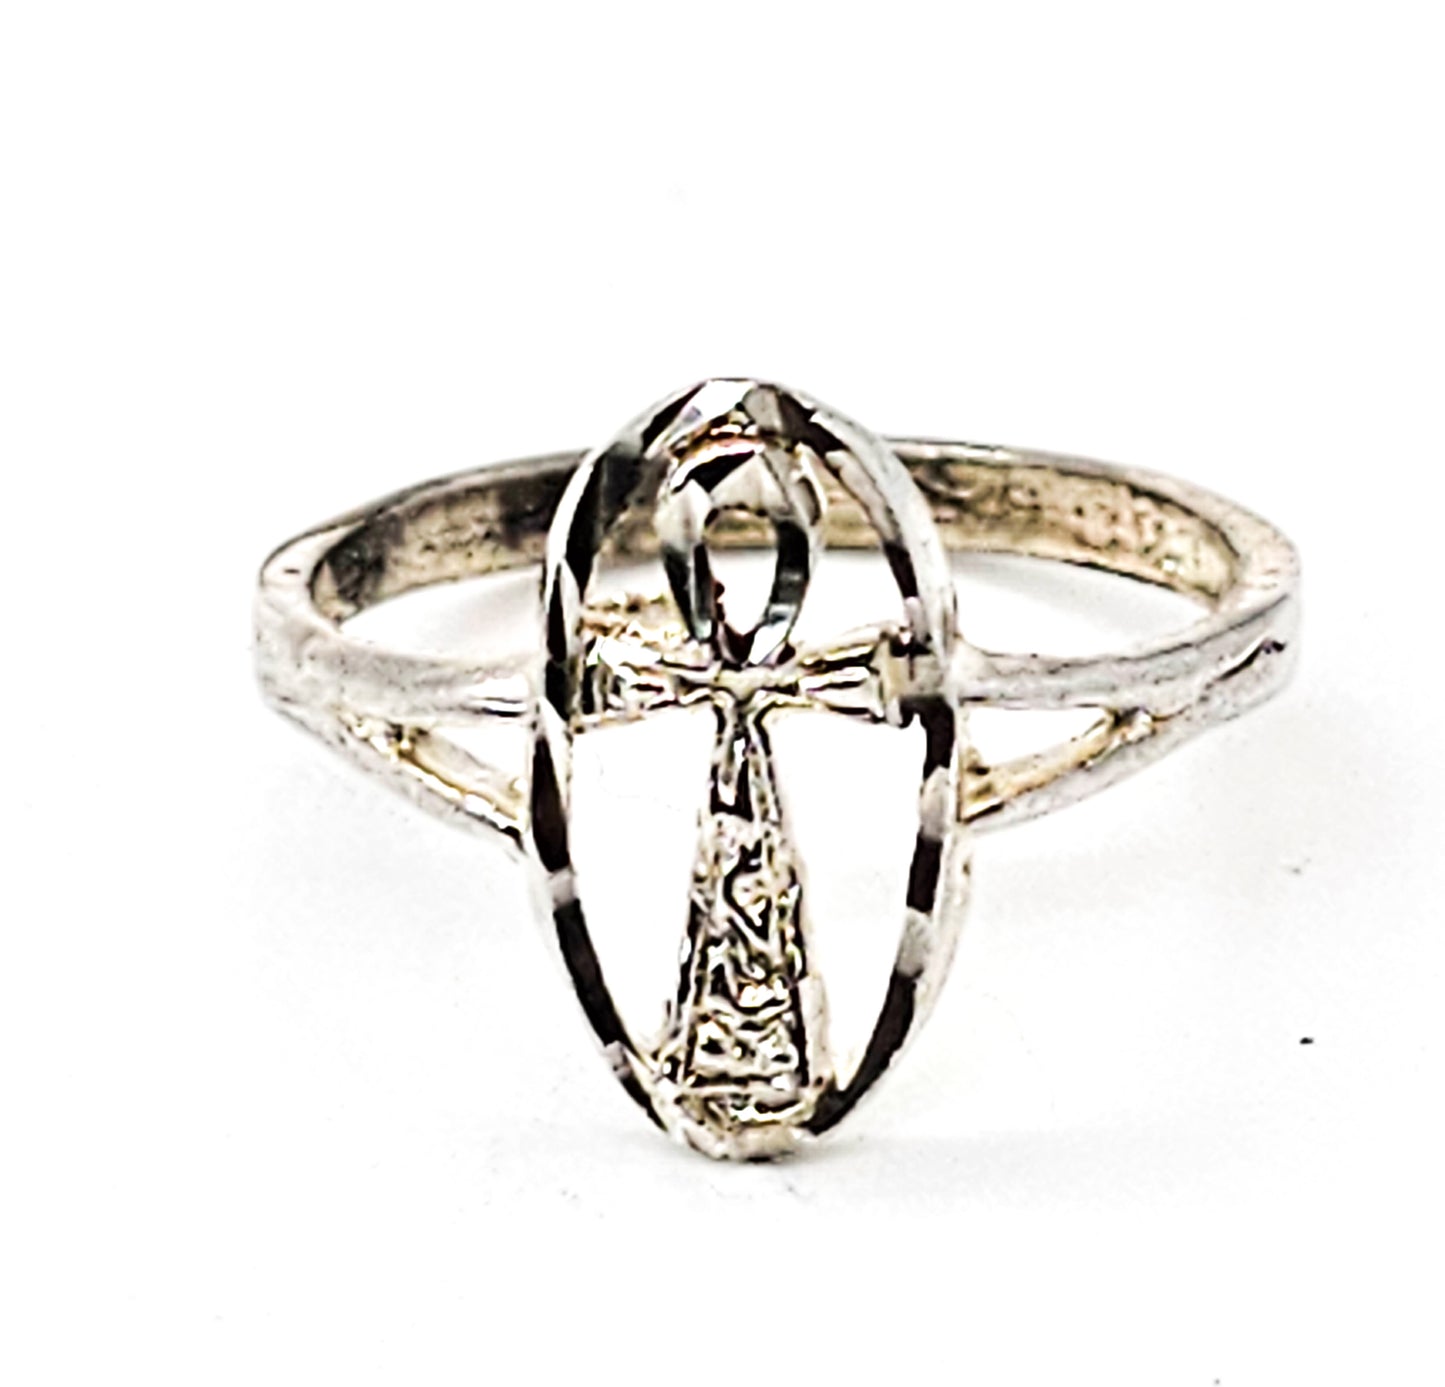 Ankh Key of Life Egyptian Revival vintage sterling silver open work ring size 6.5